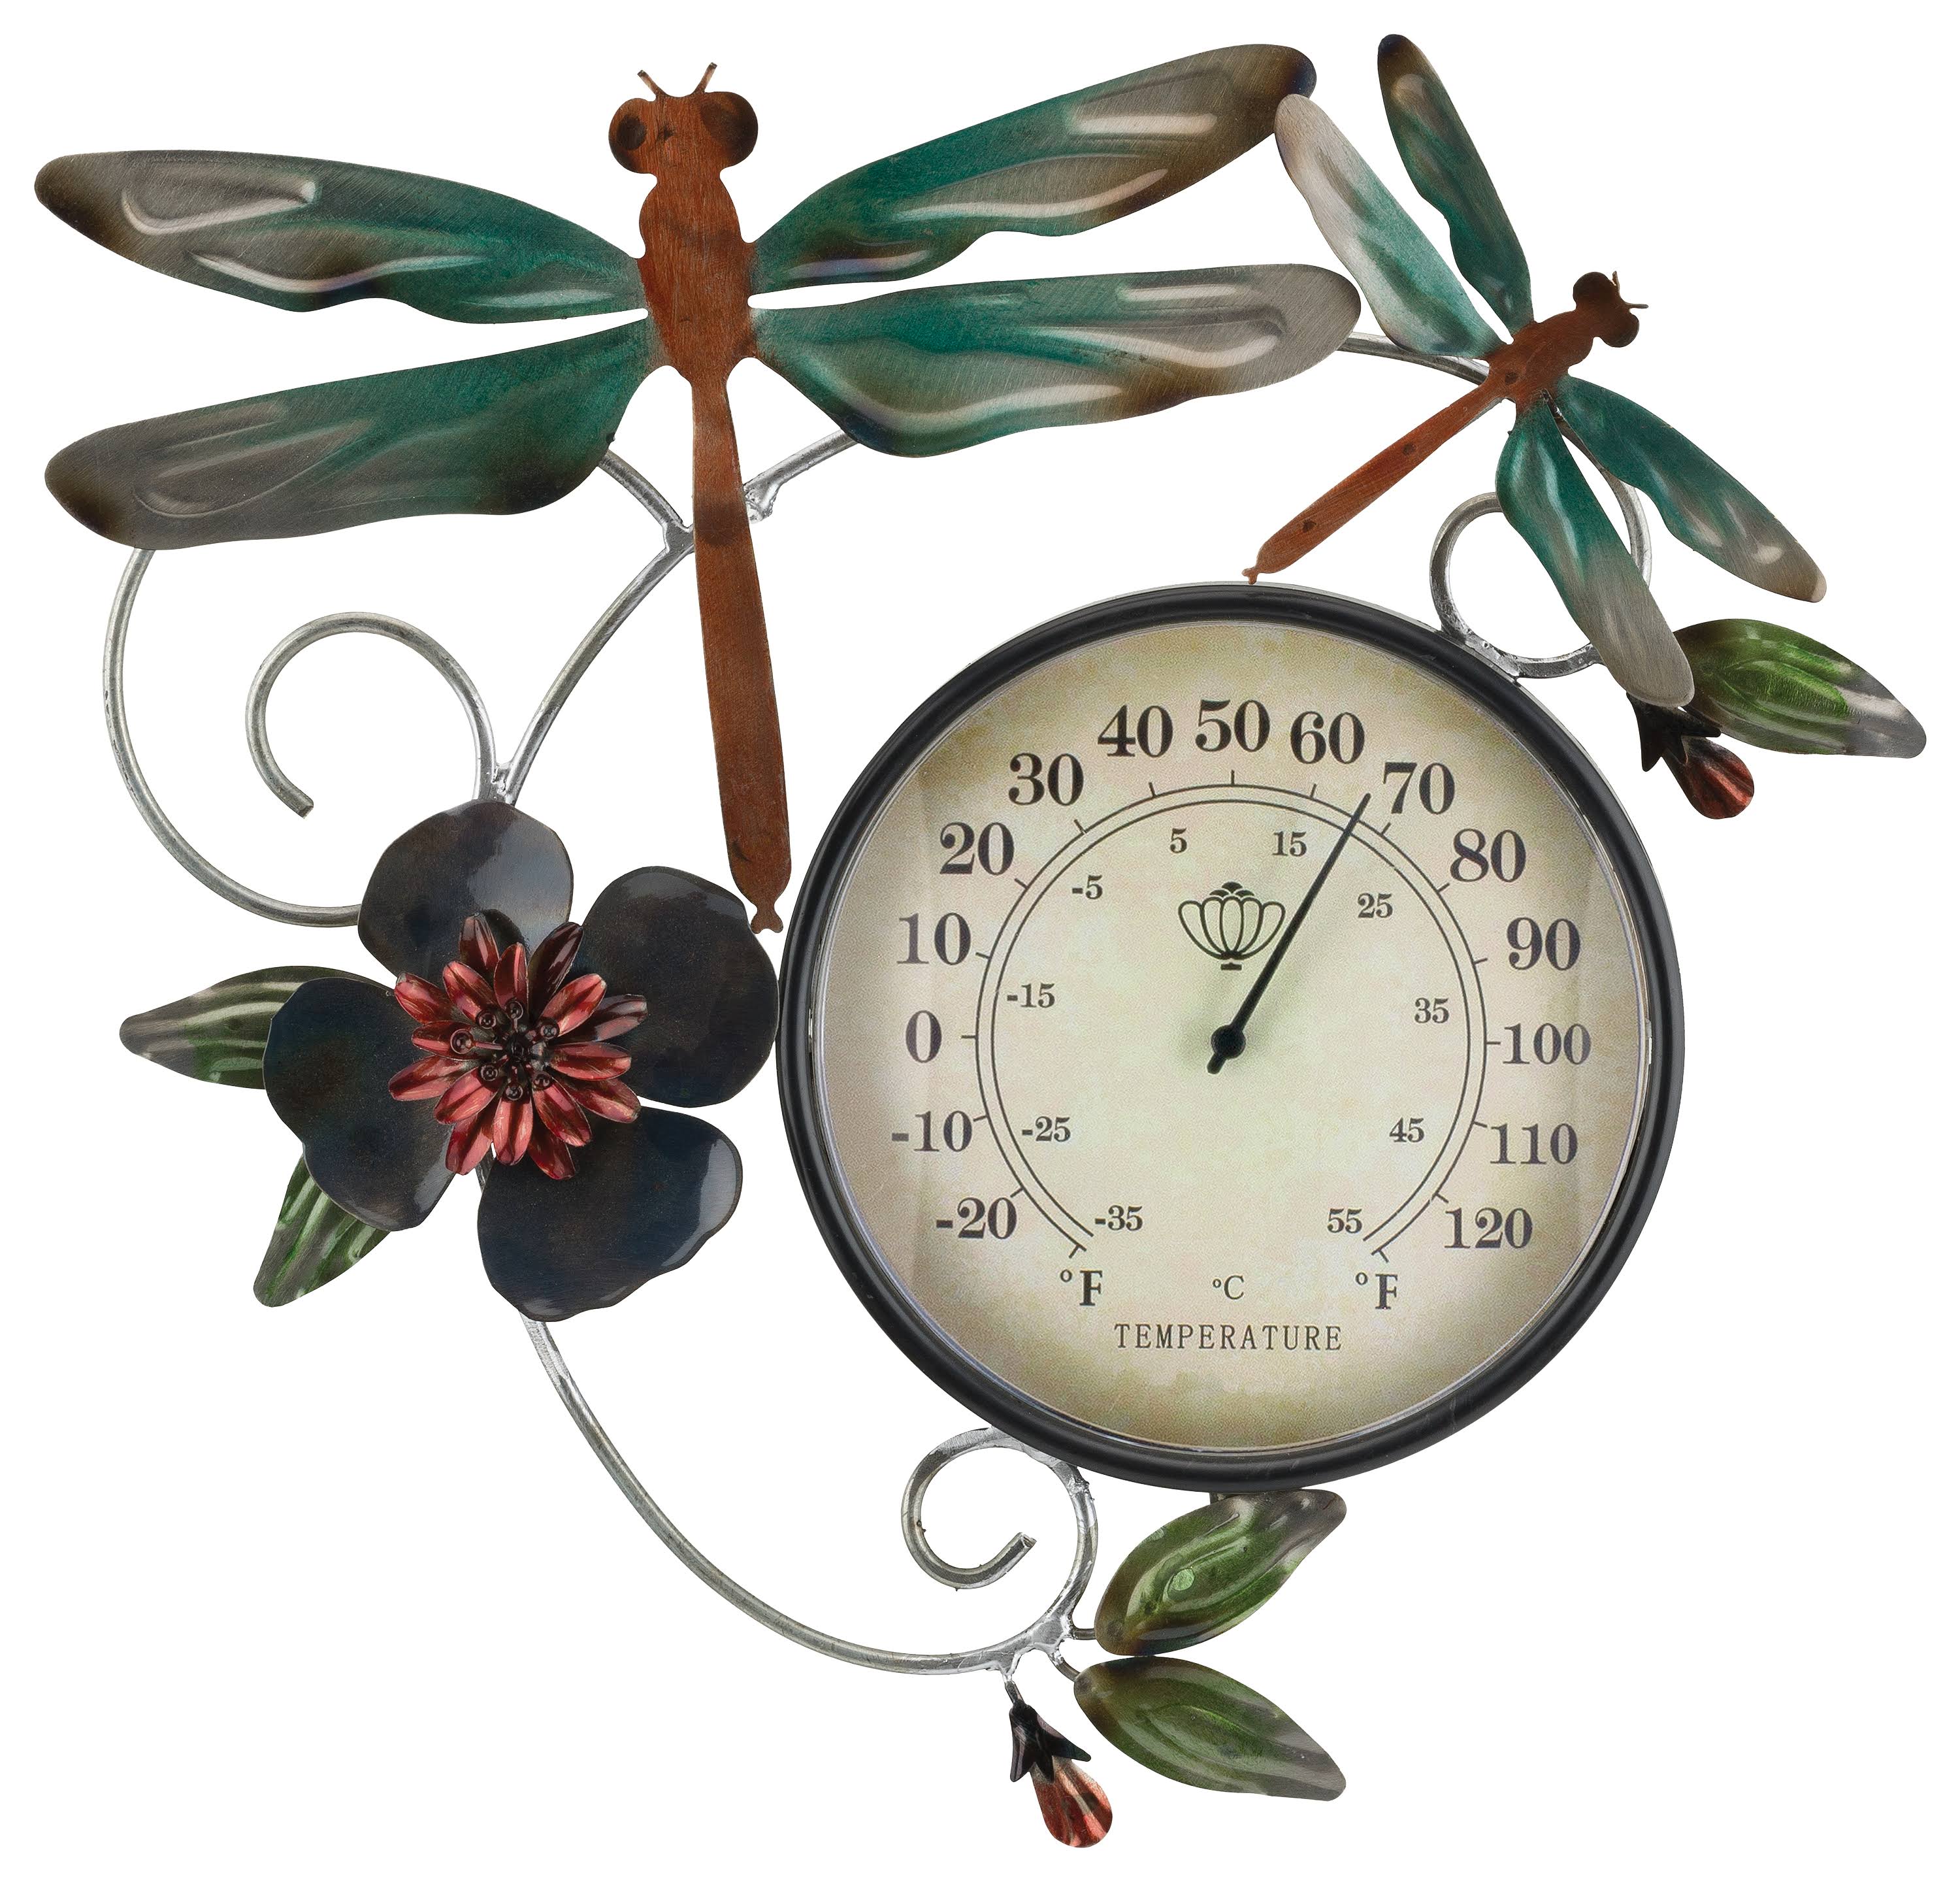 Regal Art & Gift Dragonfly Thermometer Metallic Wall Decor